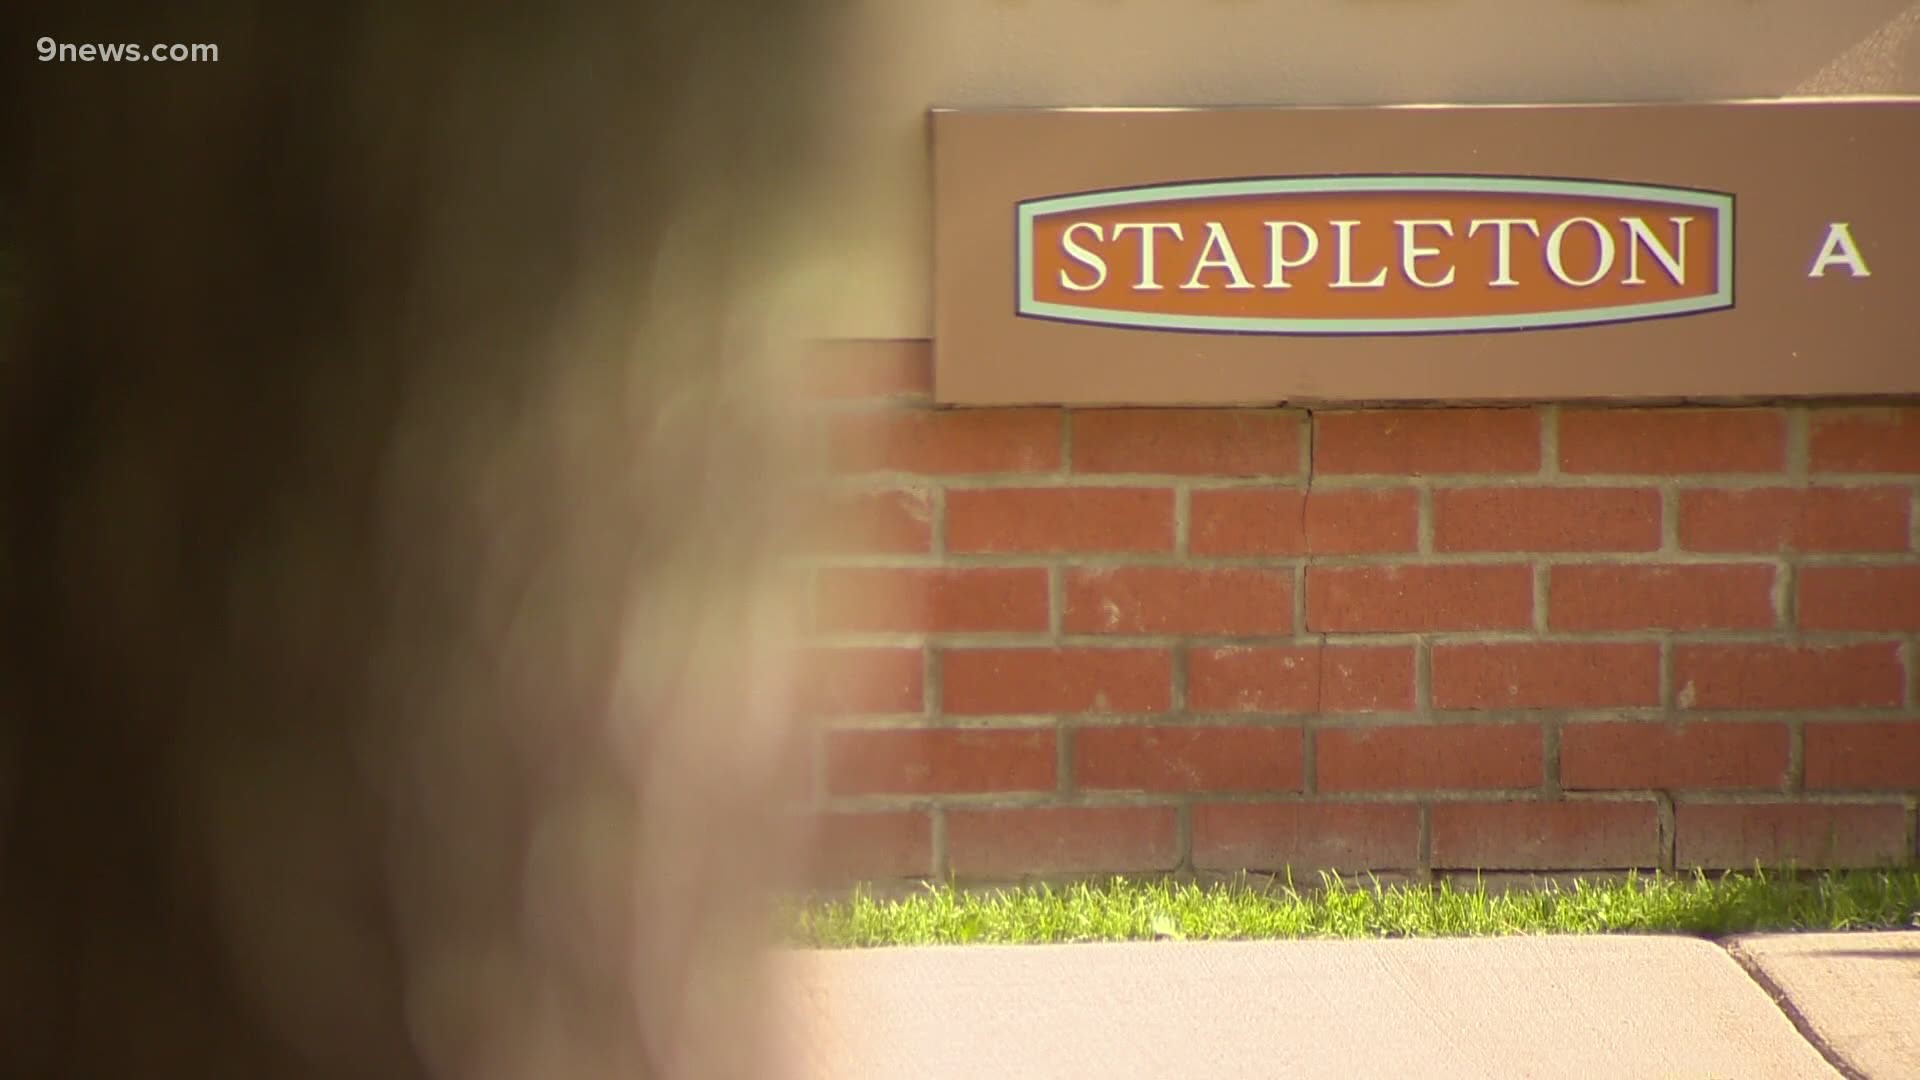 Businesses that use 'Stapleton' in their name will have to decide whether to make a change like the neighborhood.